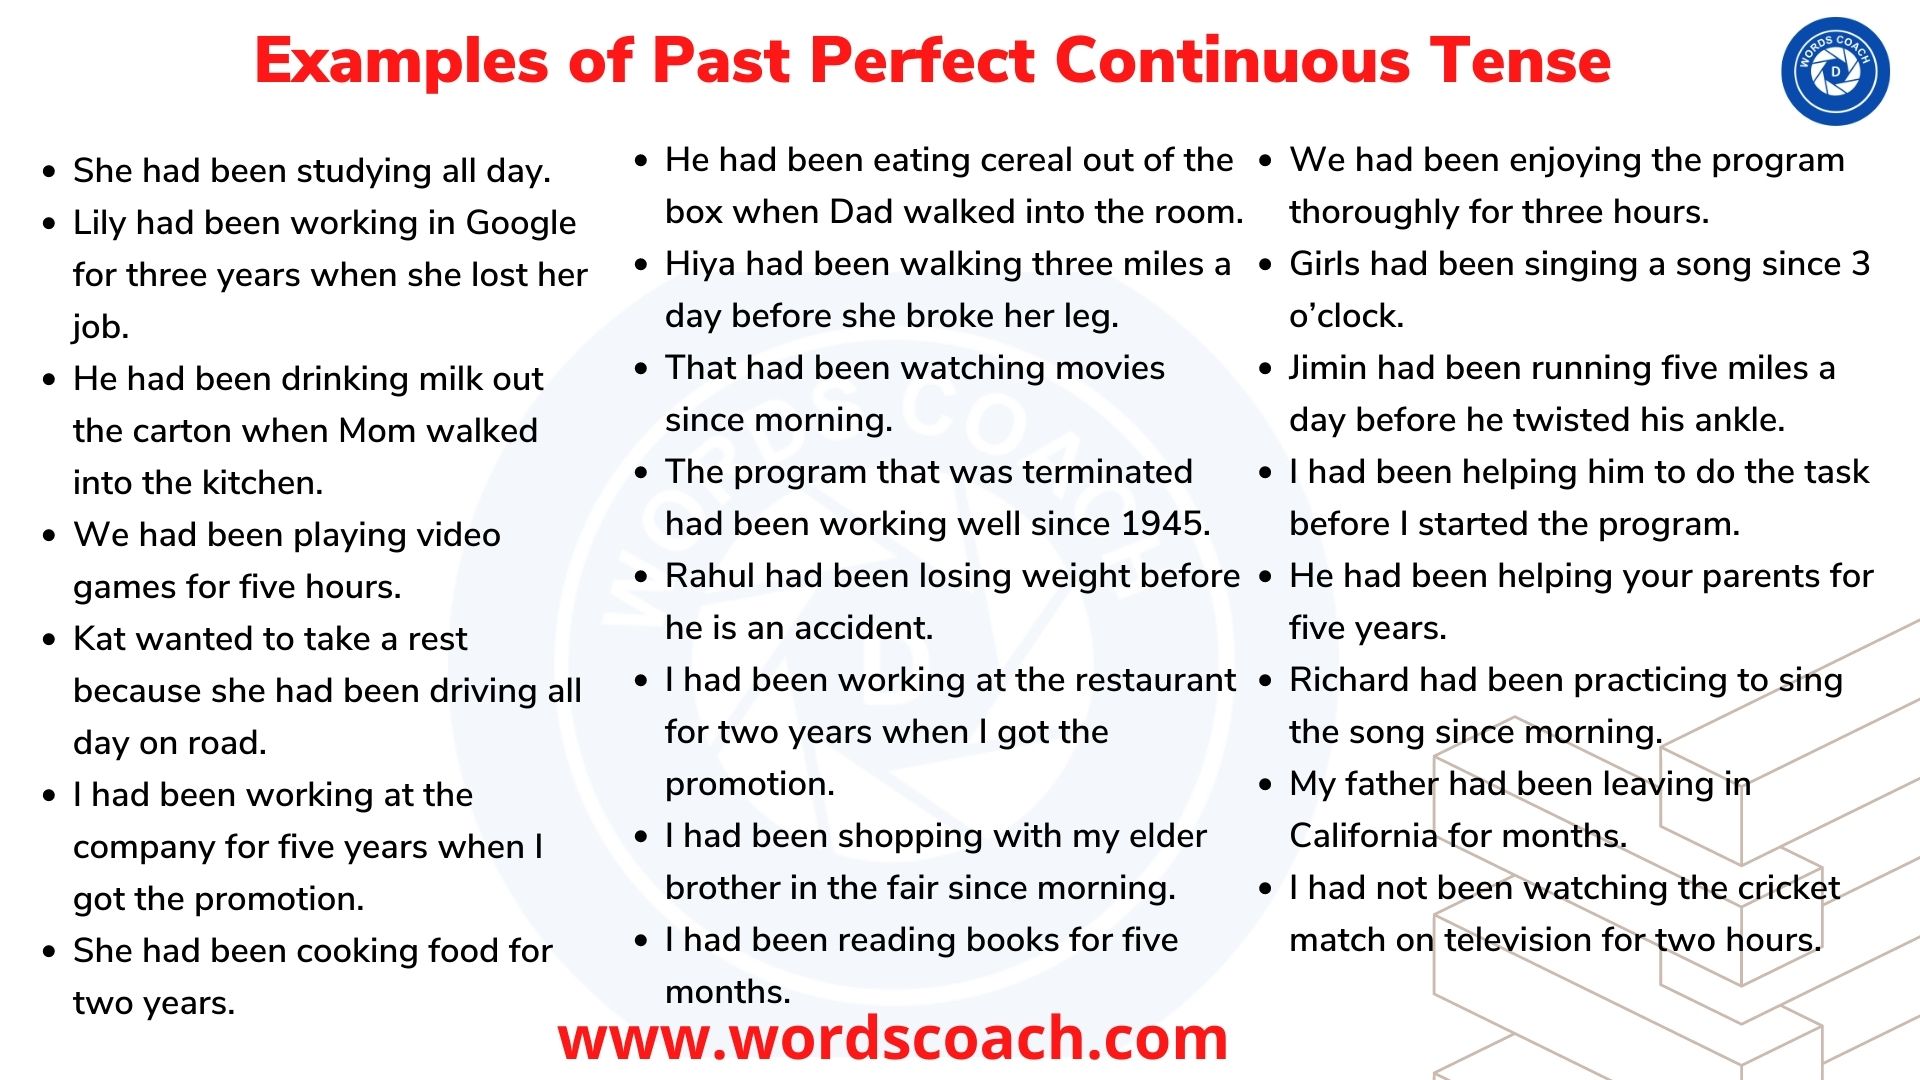 Examples of Past Perfect Continuous Tense